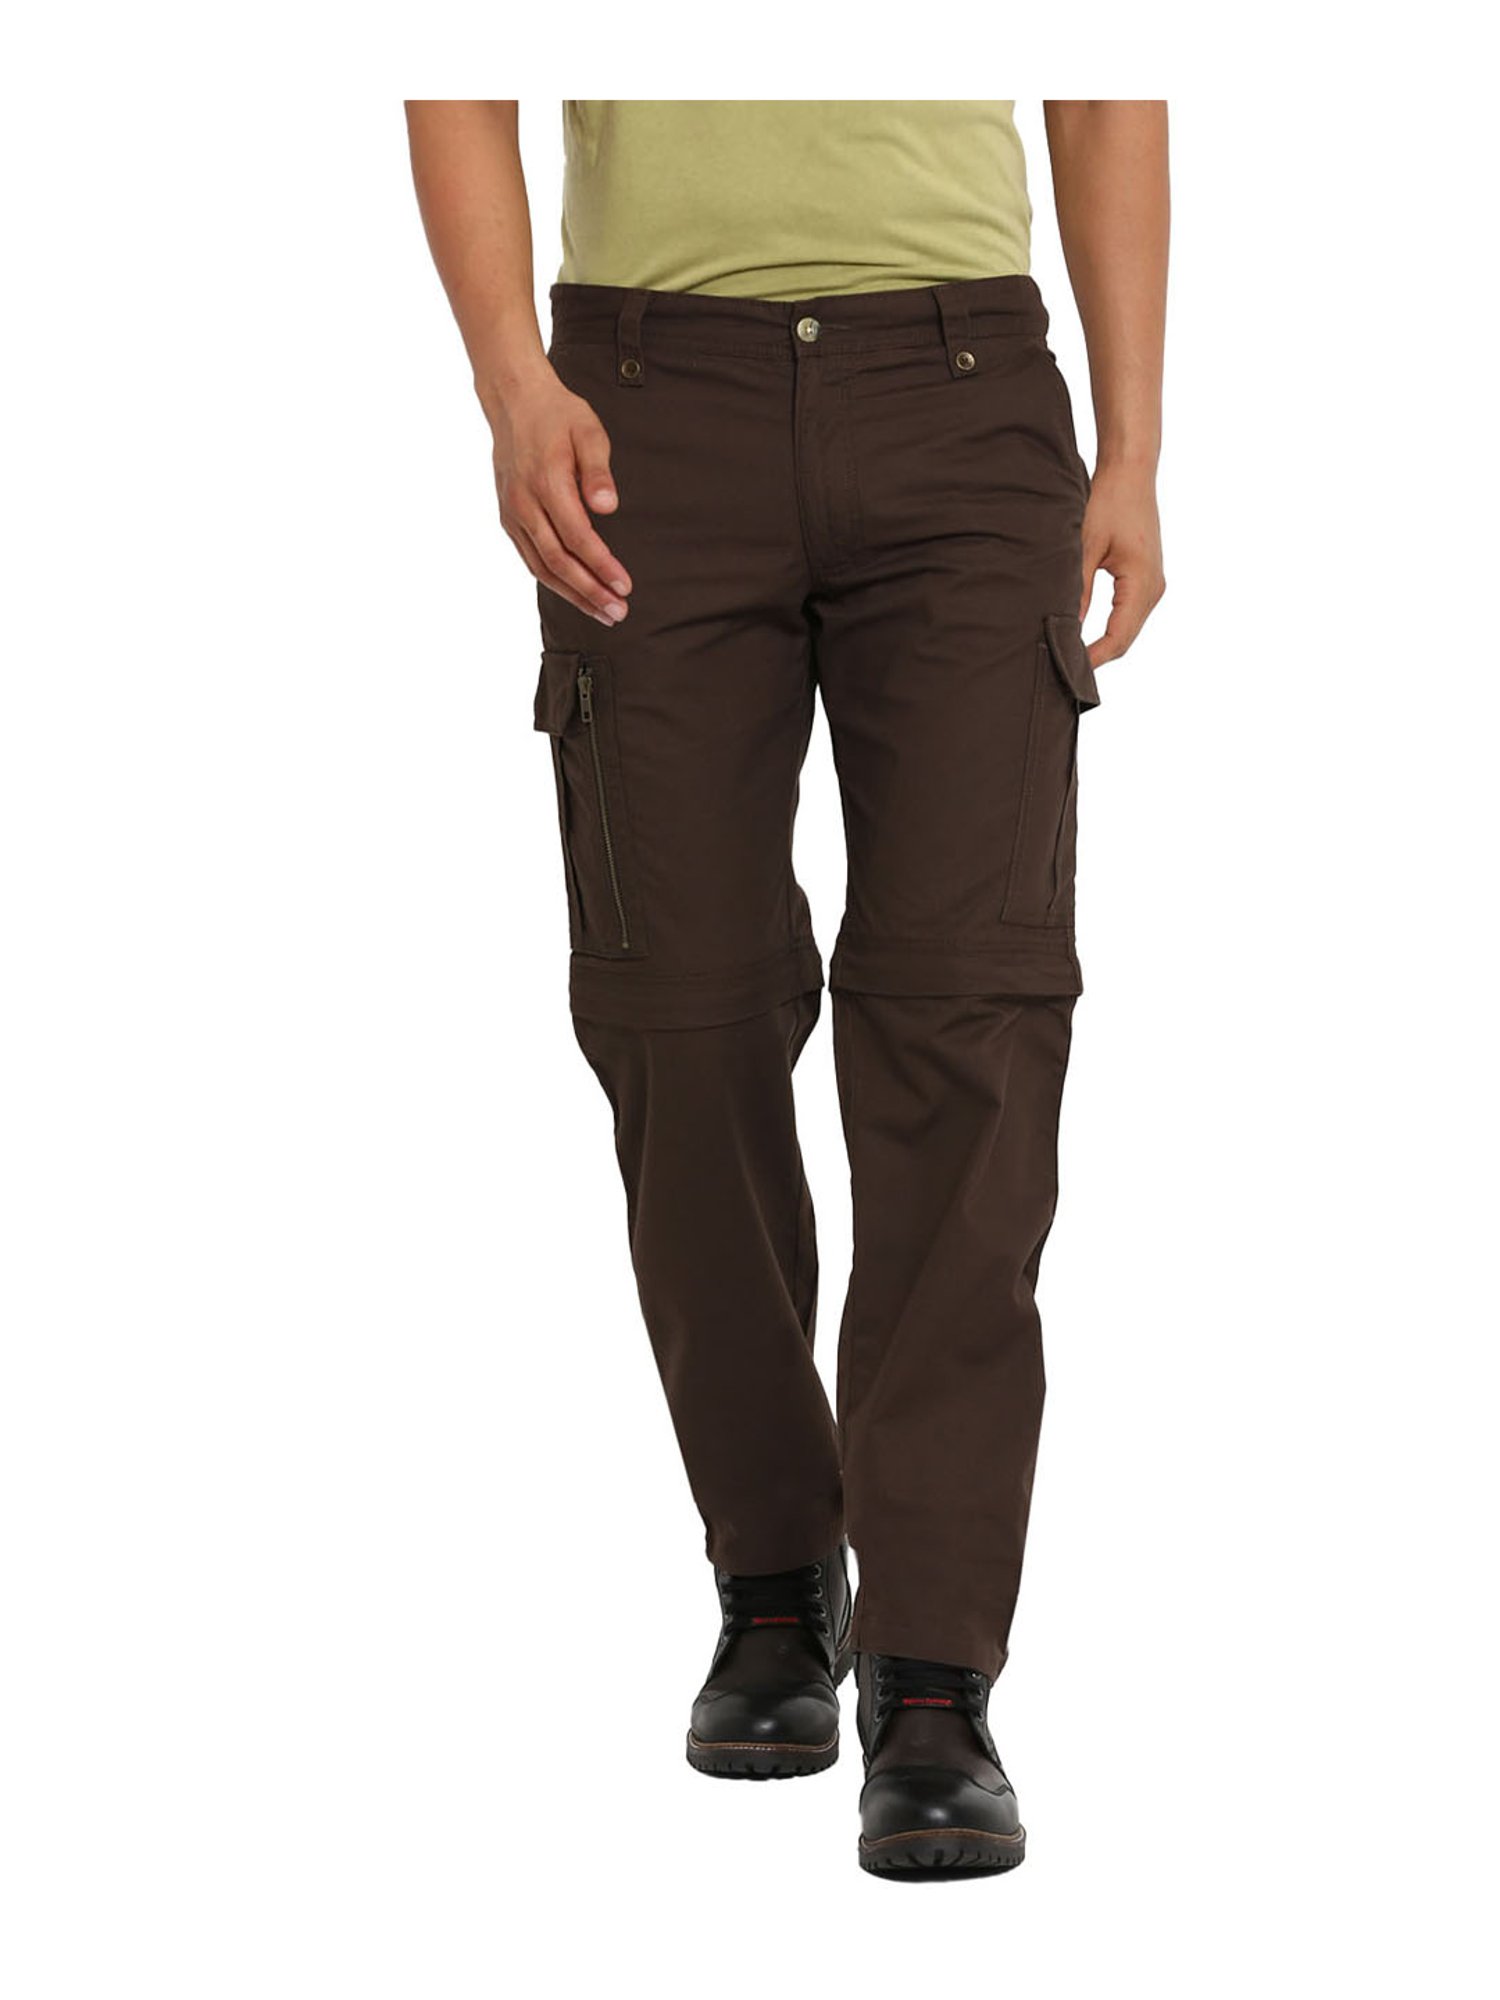 Mens Hiking Pants Convertible Quick Dry Lightweight India  Ubuy